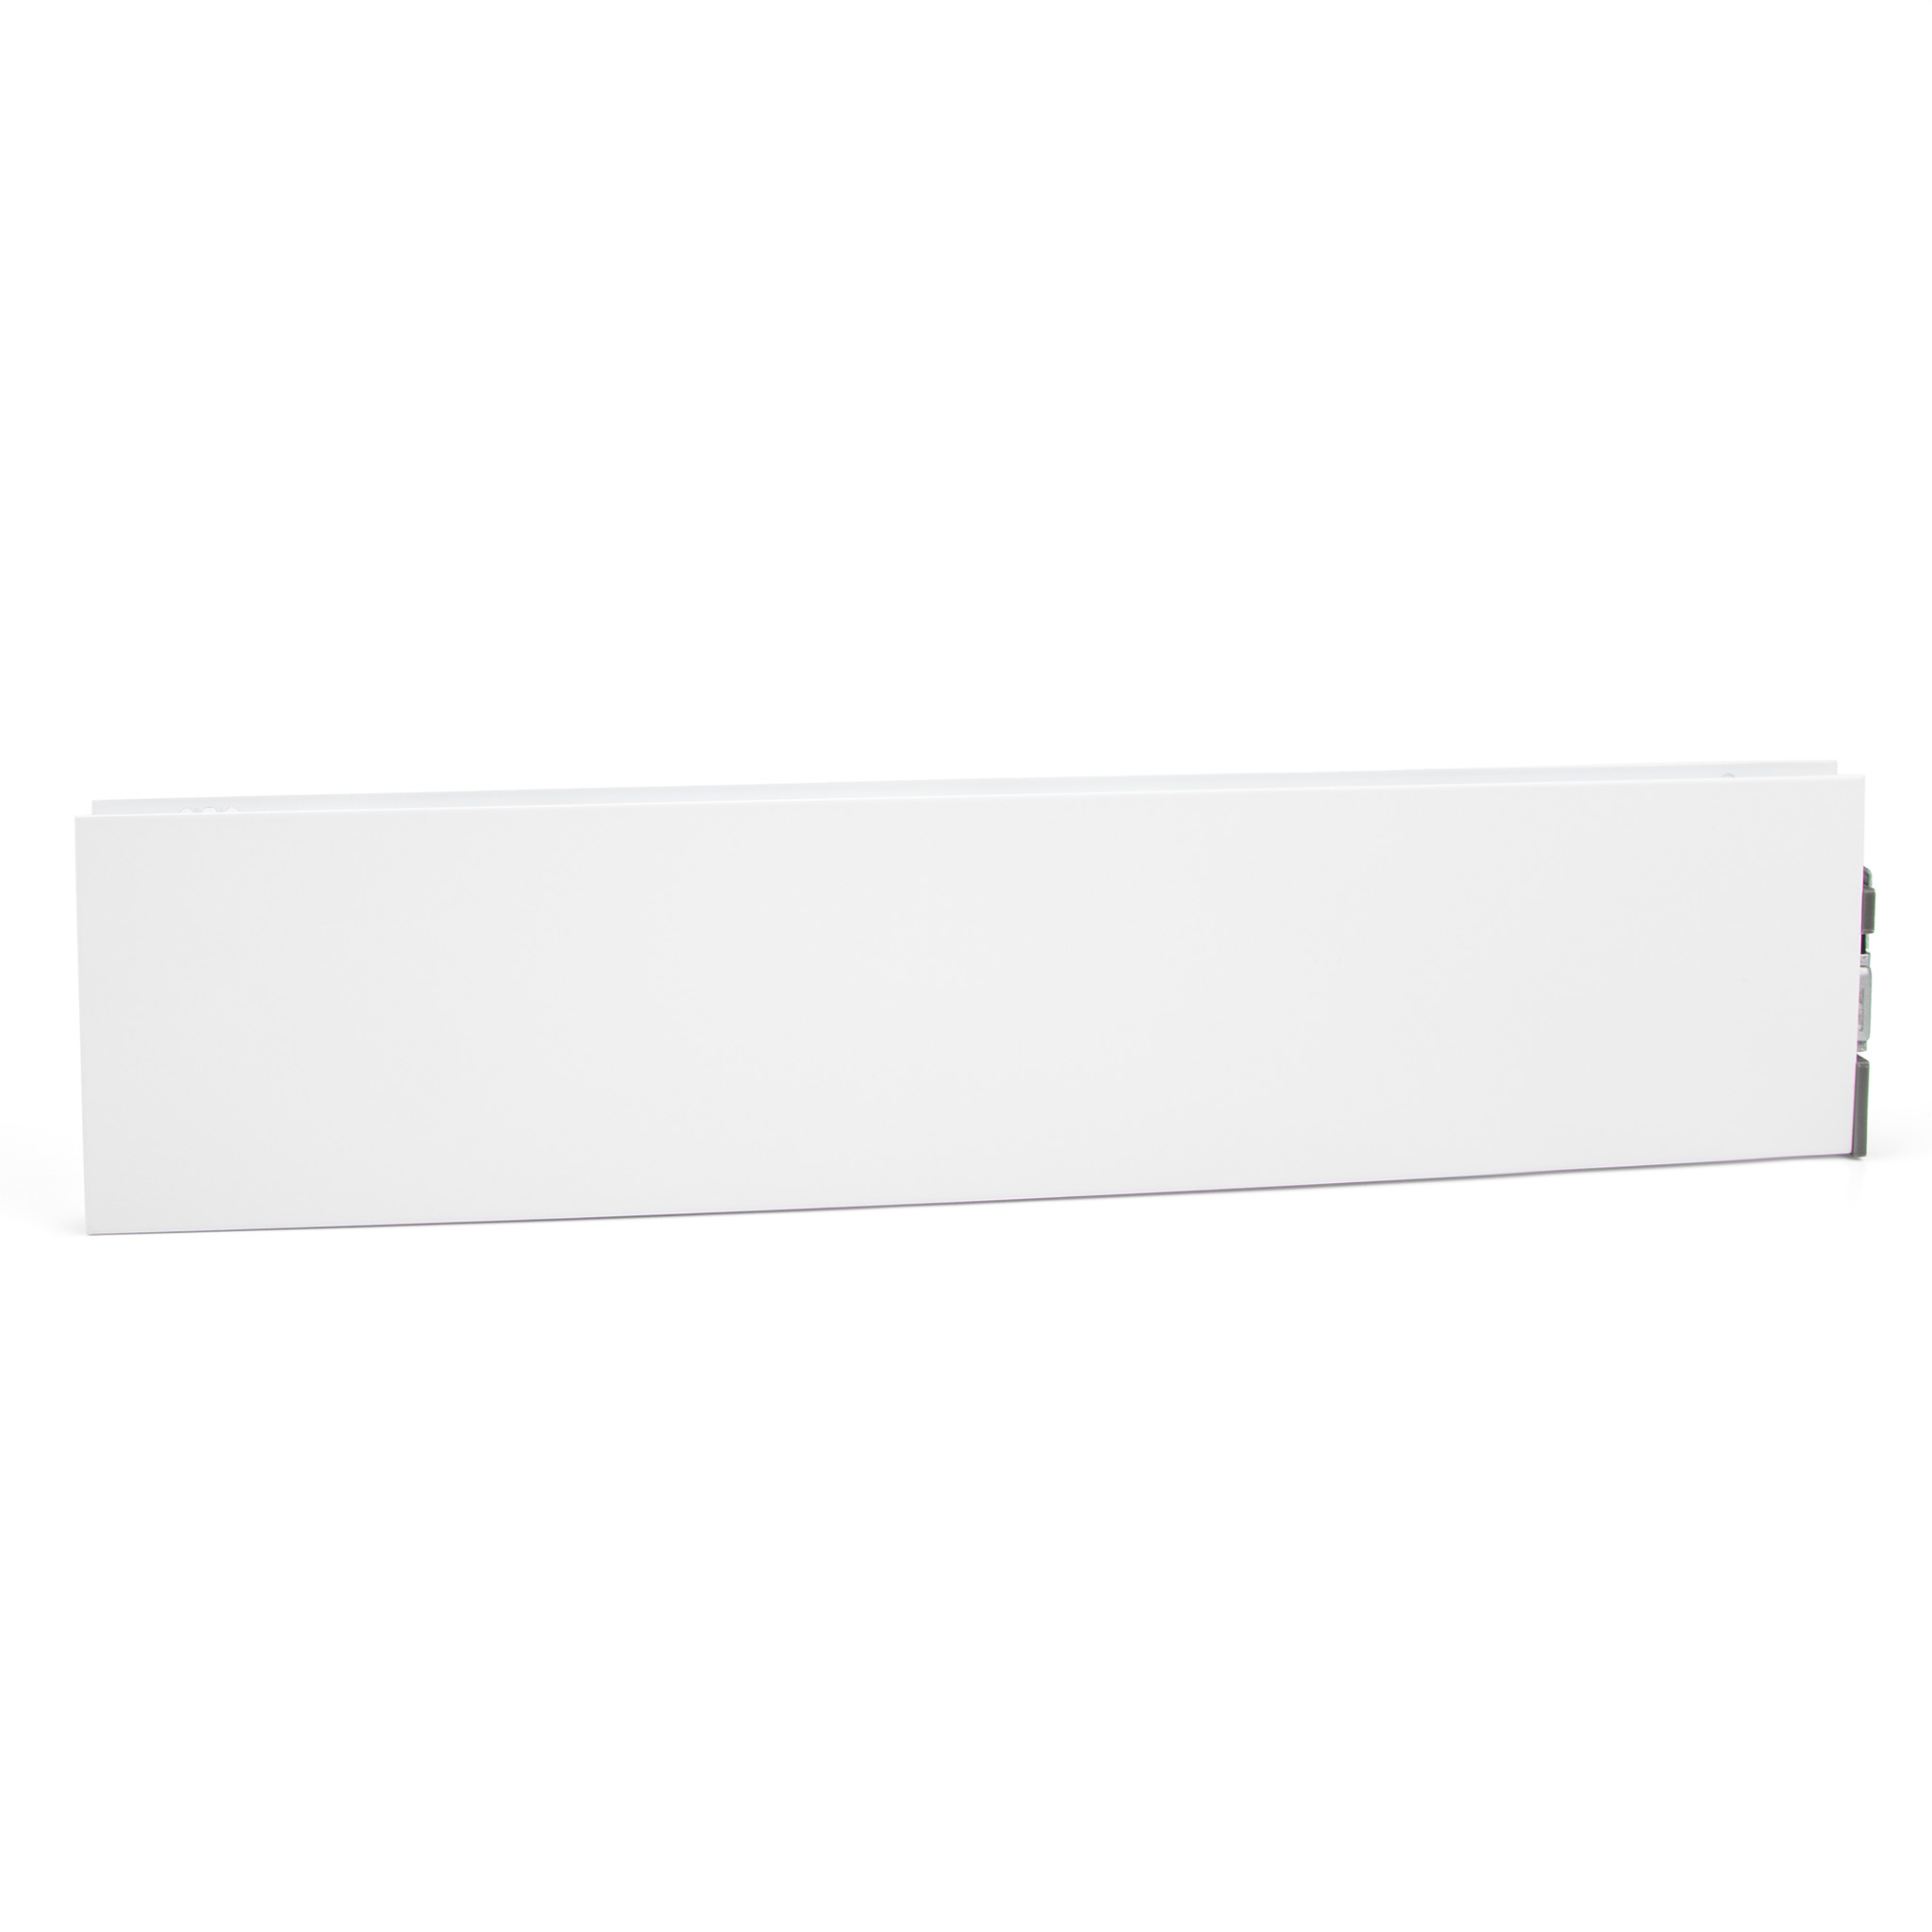 M-Series Fusion Side Wall, 400mm Length, 88mm Height, Lunar White